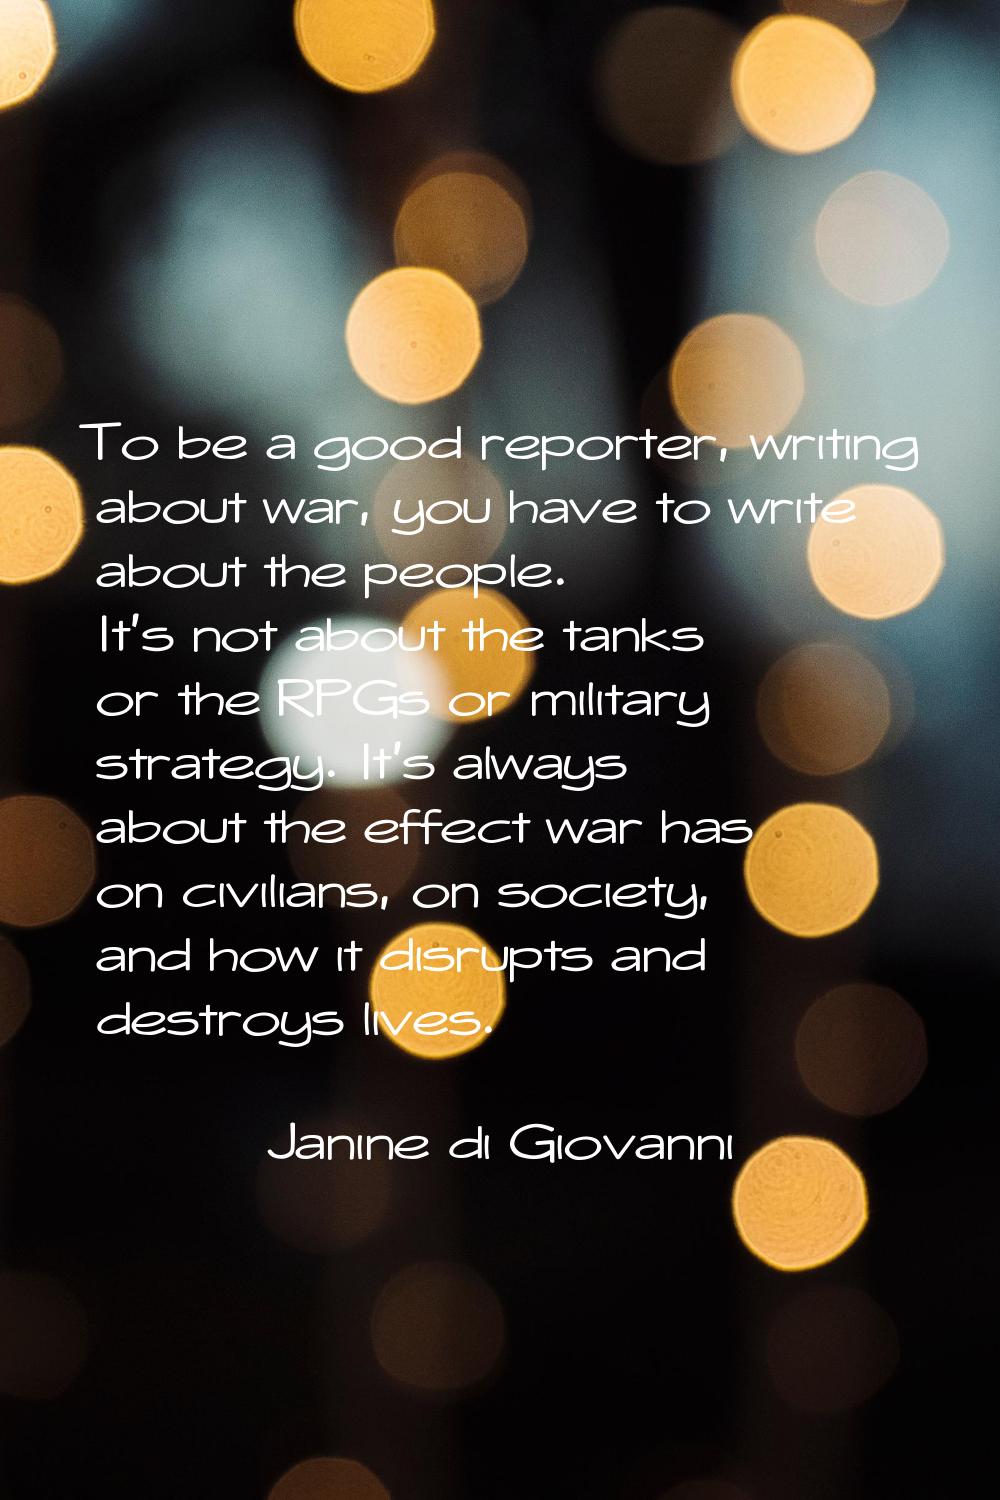 To be a good reporter, writing about war, you have to write about the people. It's not about the ta